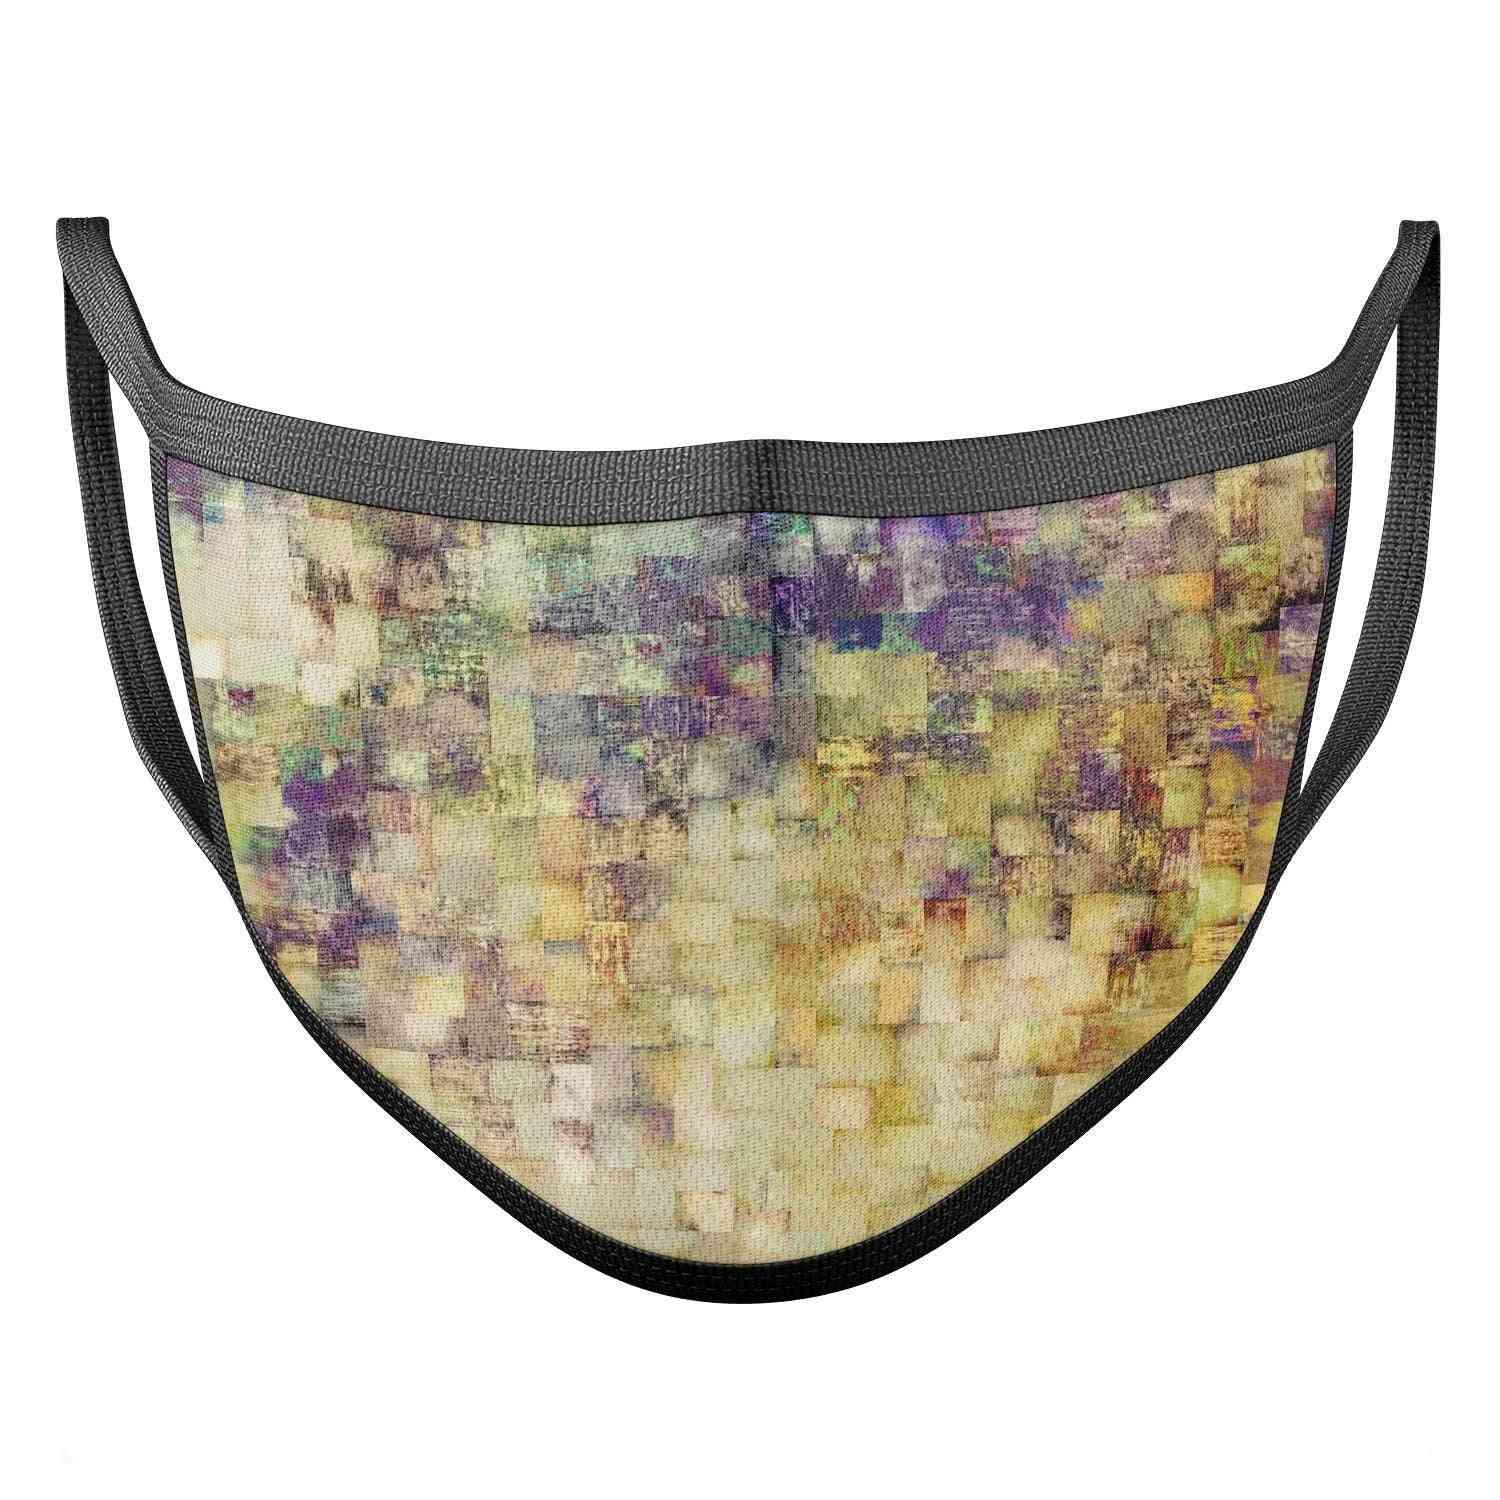 Mosaïque violette abstraite grungy - made in USA couvre-bouche unisexe